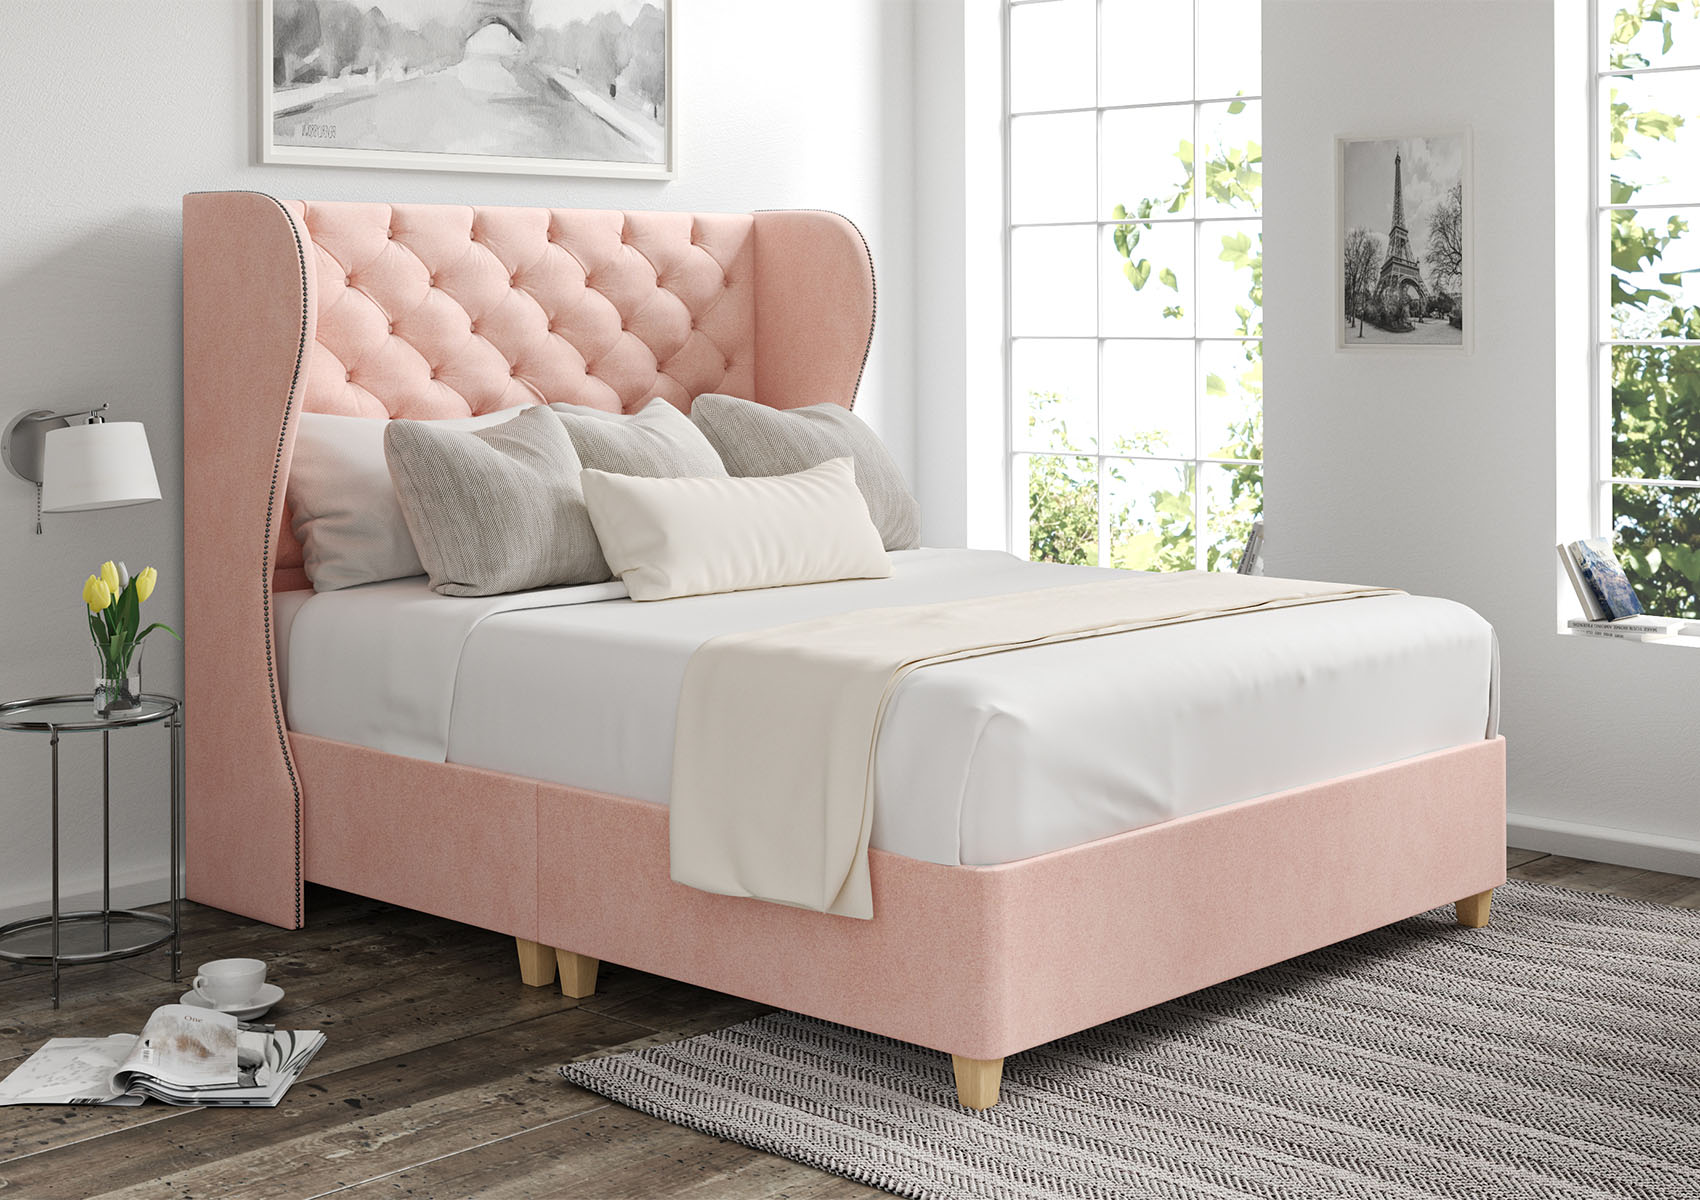 View Miami Arlington Candyfloss Upholstered King Size Winged Bed Time4Sleep information